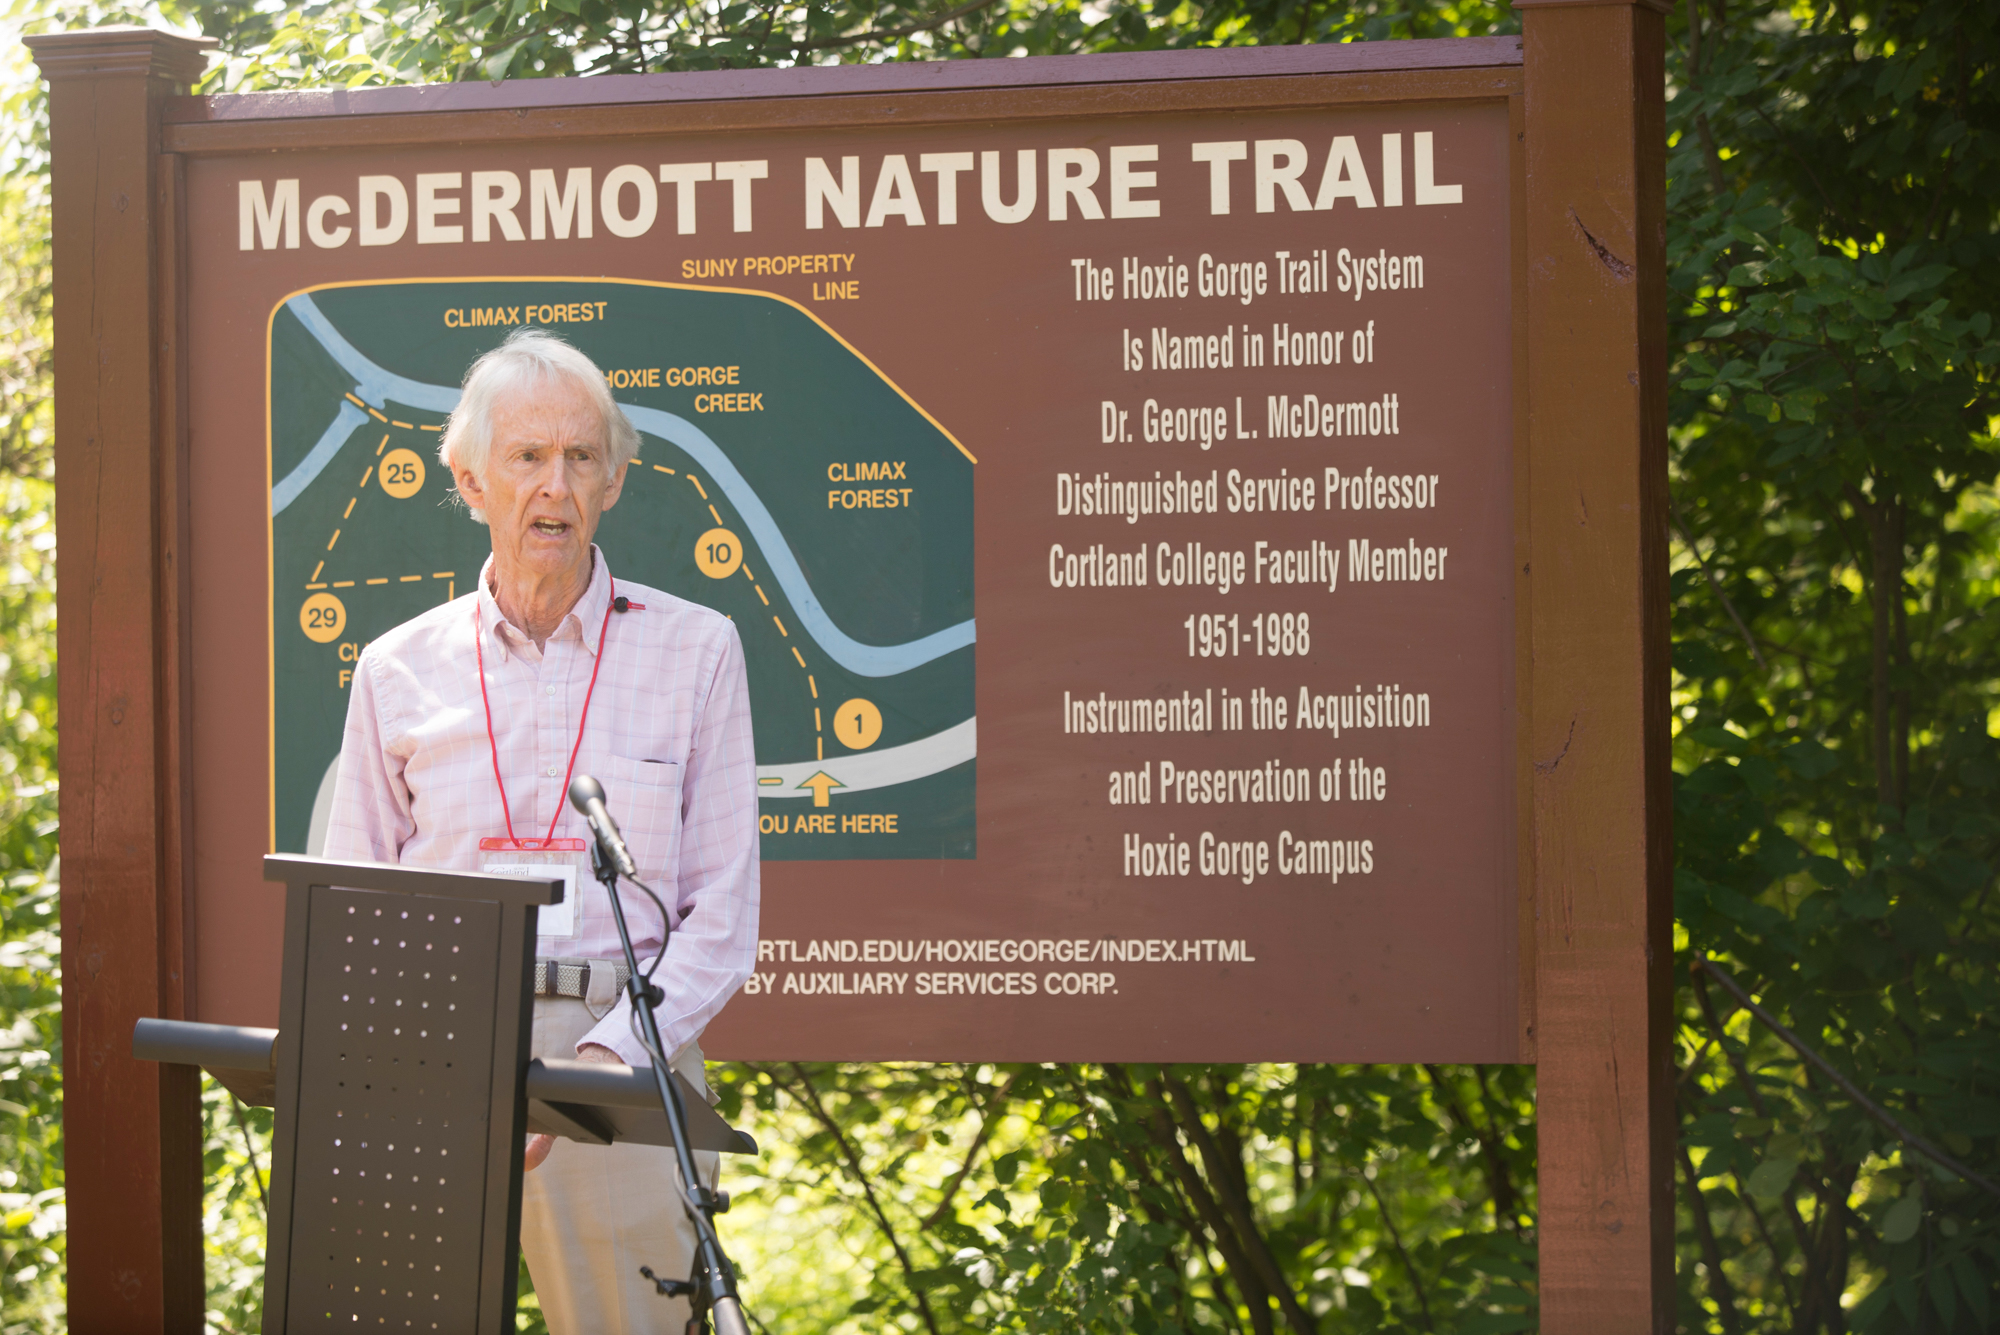 McDermott Nature Trail at Hoxie Gorge